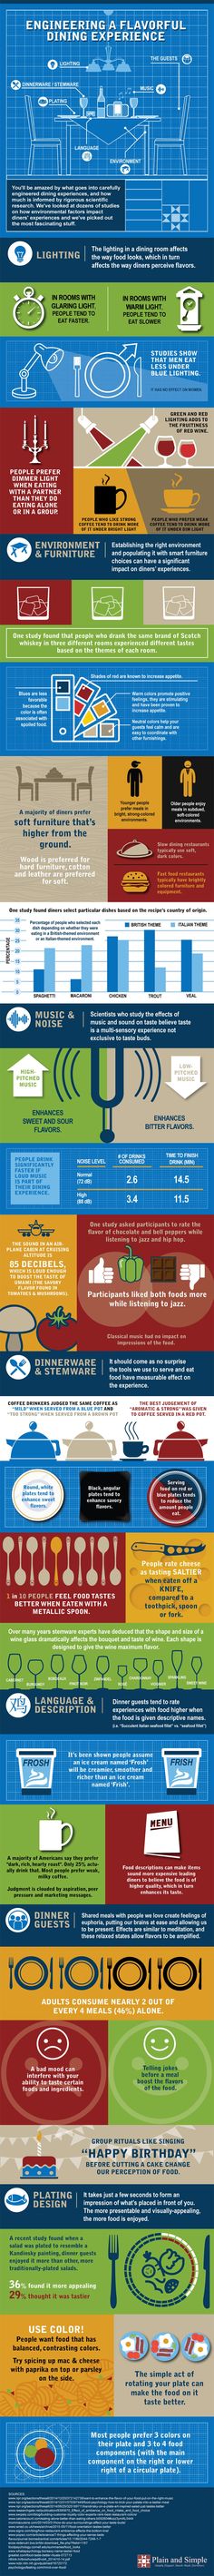 Engineering a Flavorful Dining Experience Infographic. Topic: restaurant, food service, interior design. Restaurants, Restaurant Recipes, Menu Design, Food Engineering, Food Service, Restaurant Marketing, Restaurant Food, Restaurant Owner